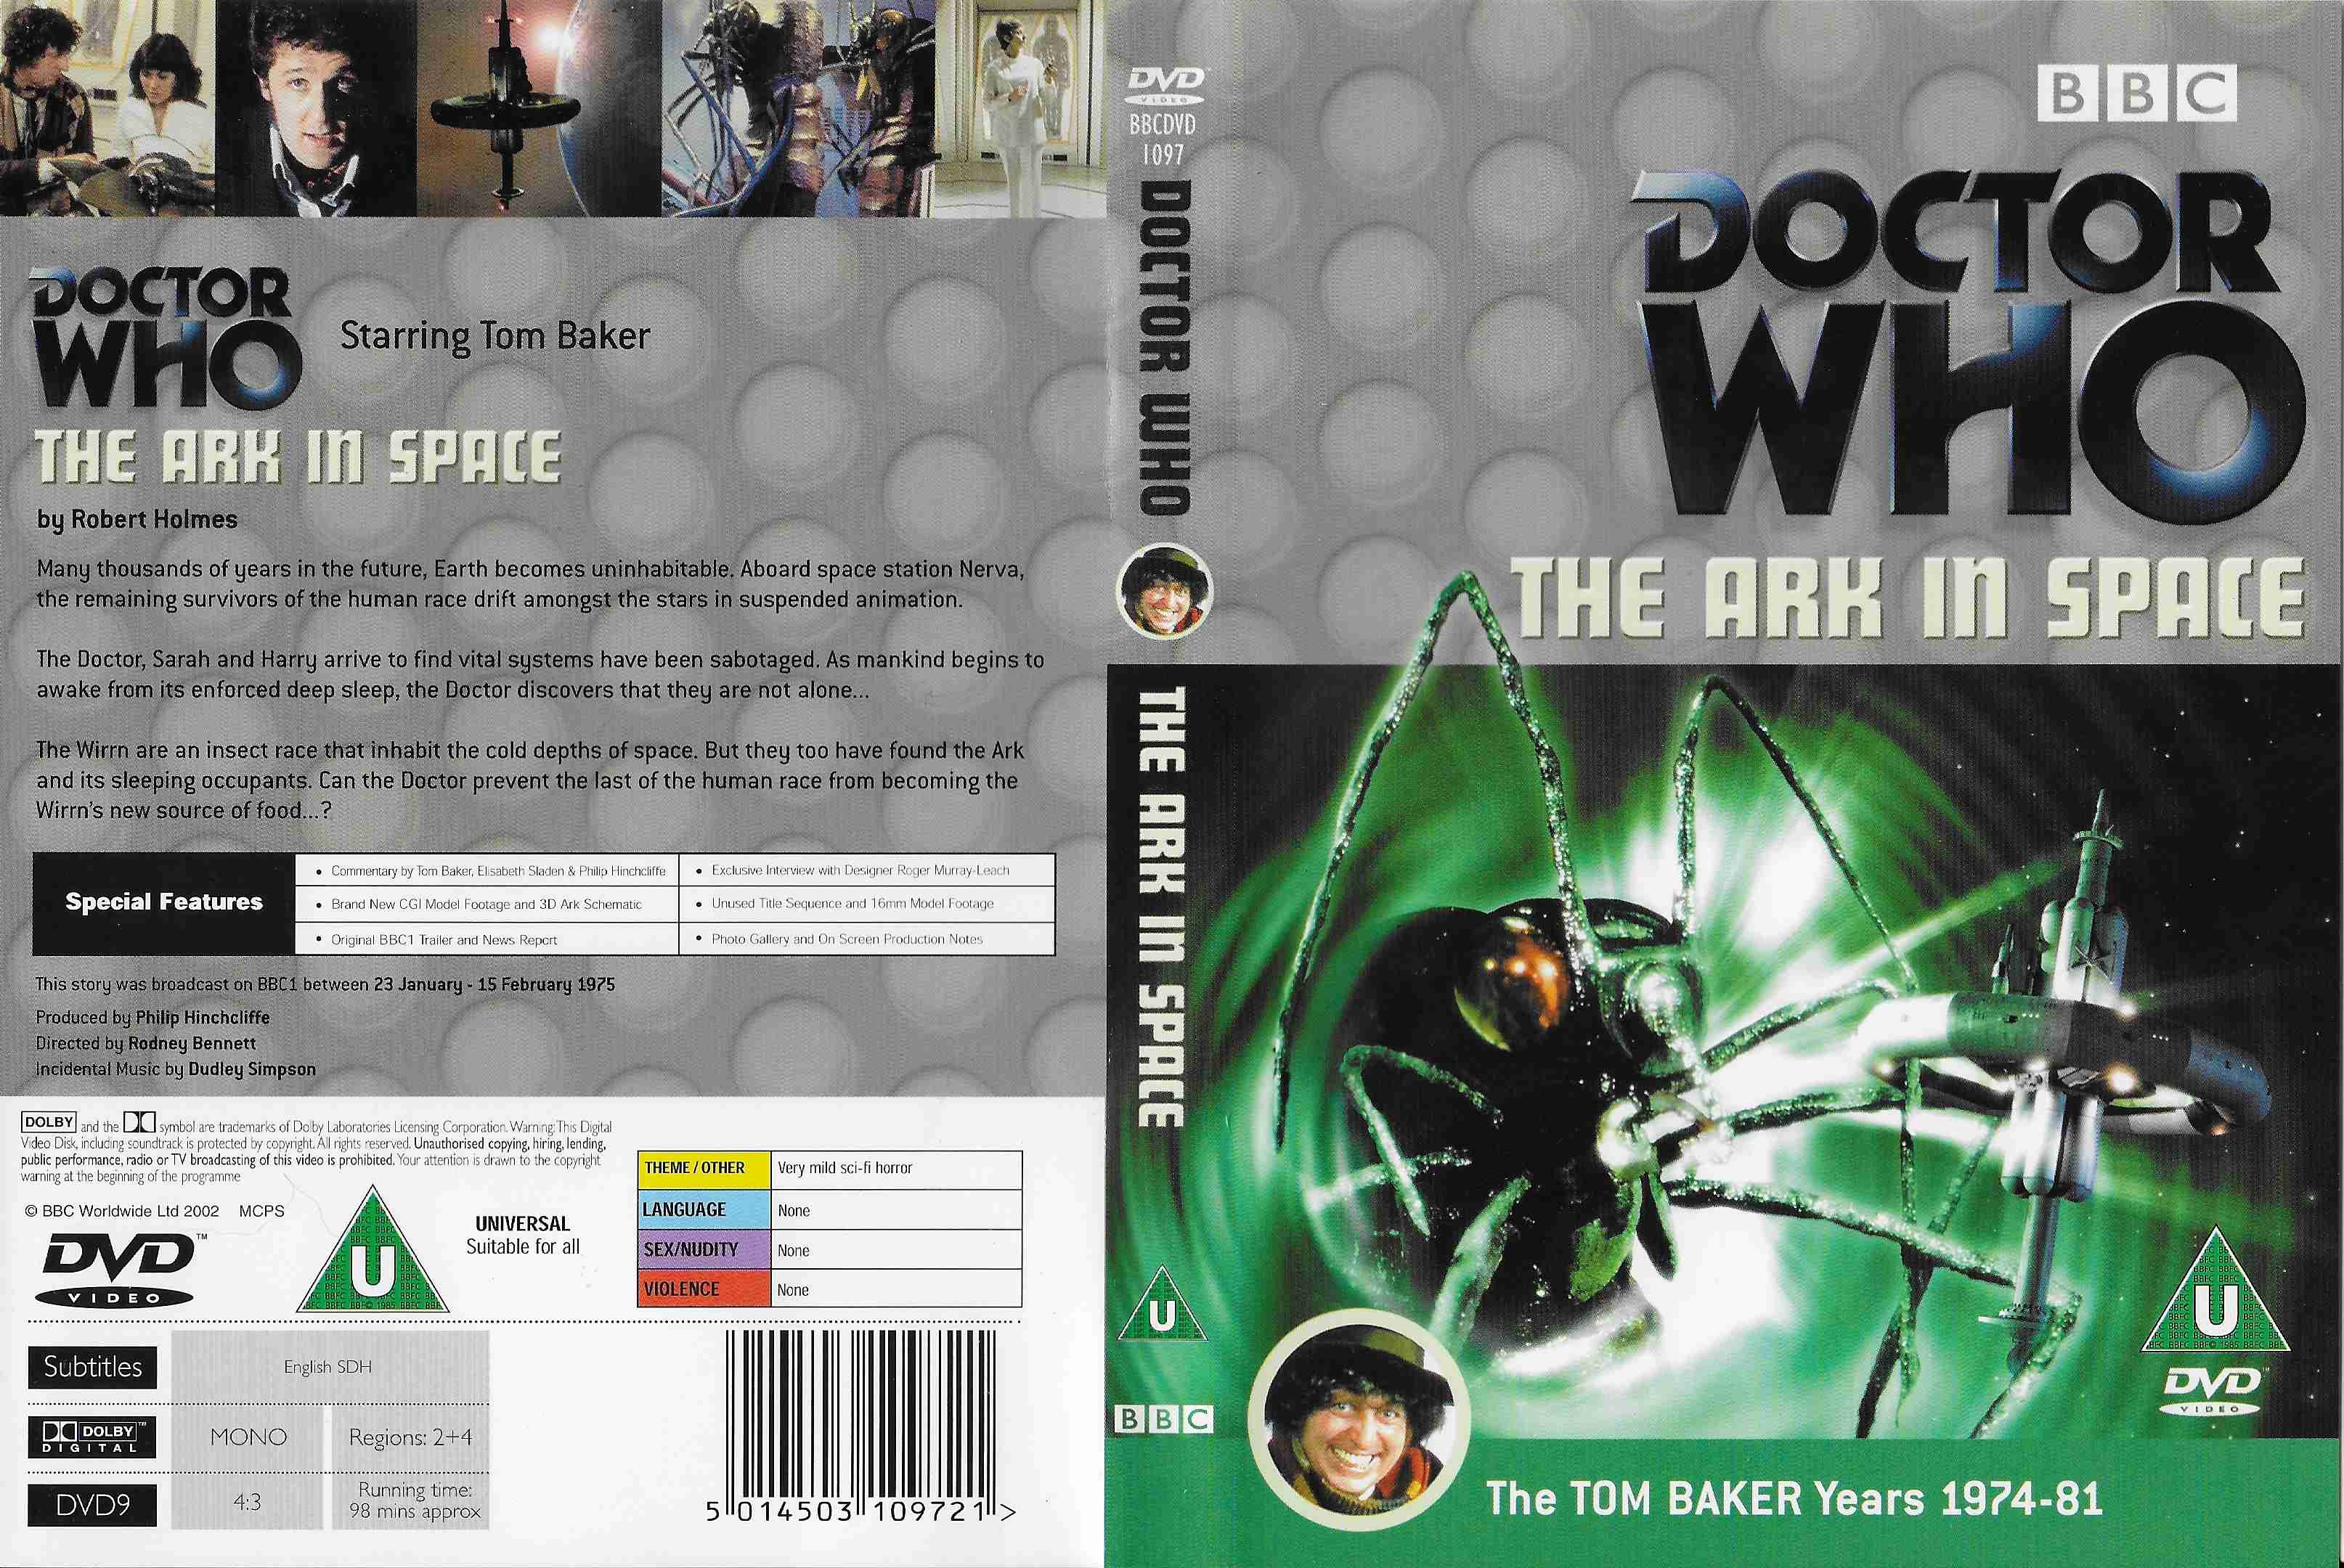 Picture of BBCDVD 1097 Doctor Who - The ark in space by artist Robert Holmes from the BBC records and Tapes library